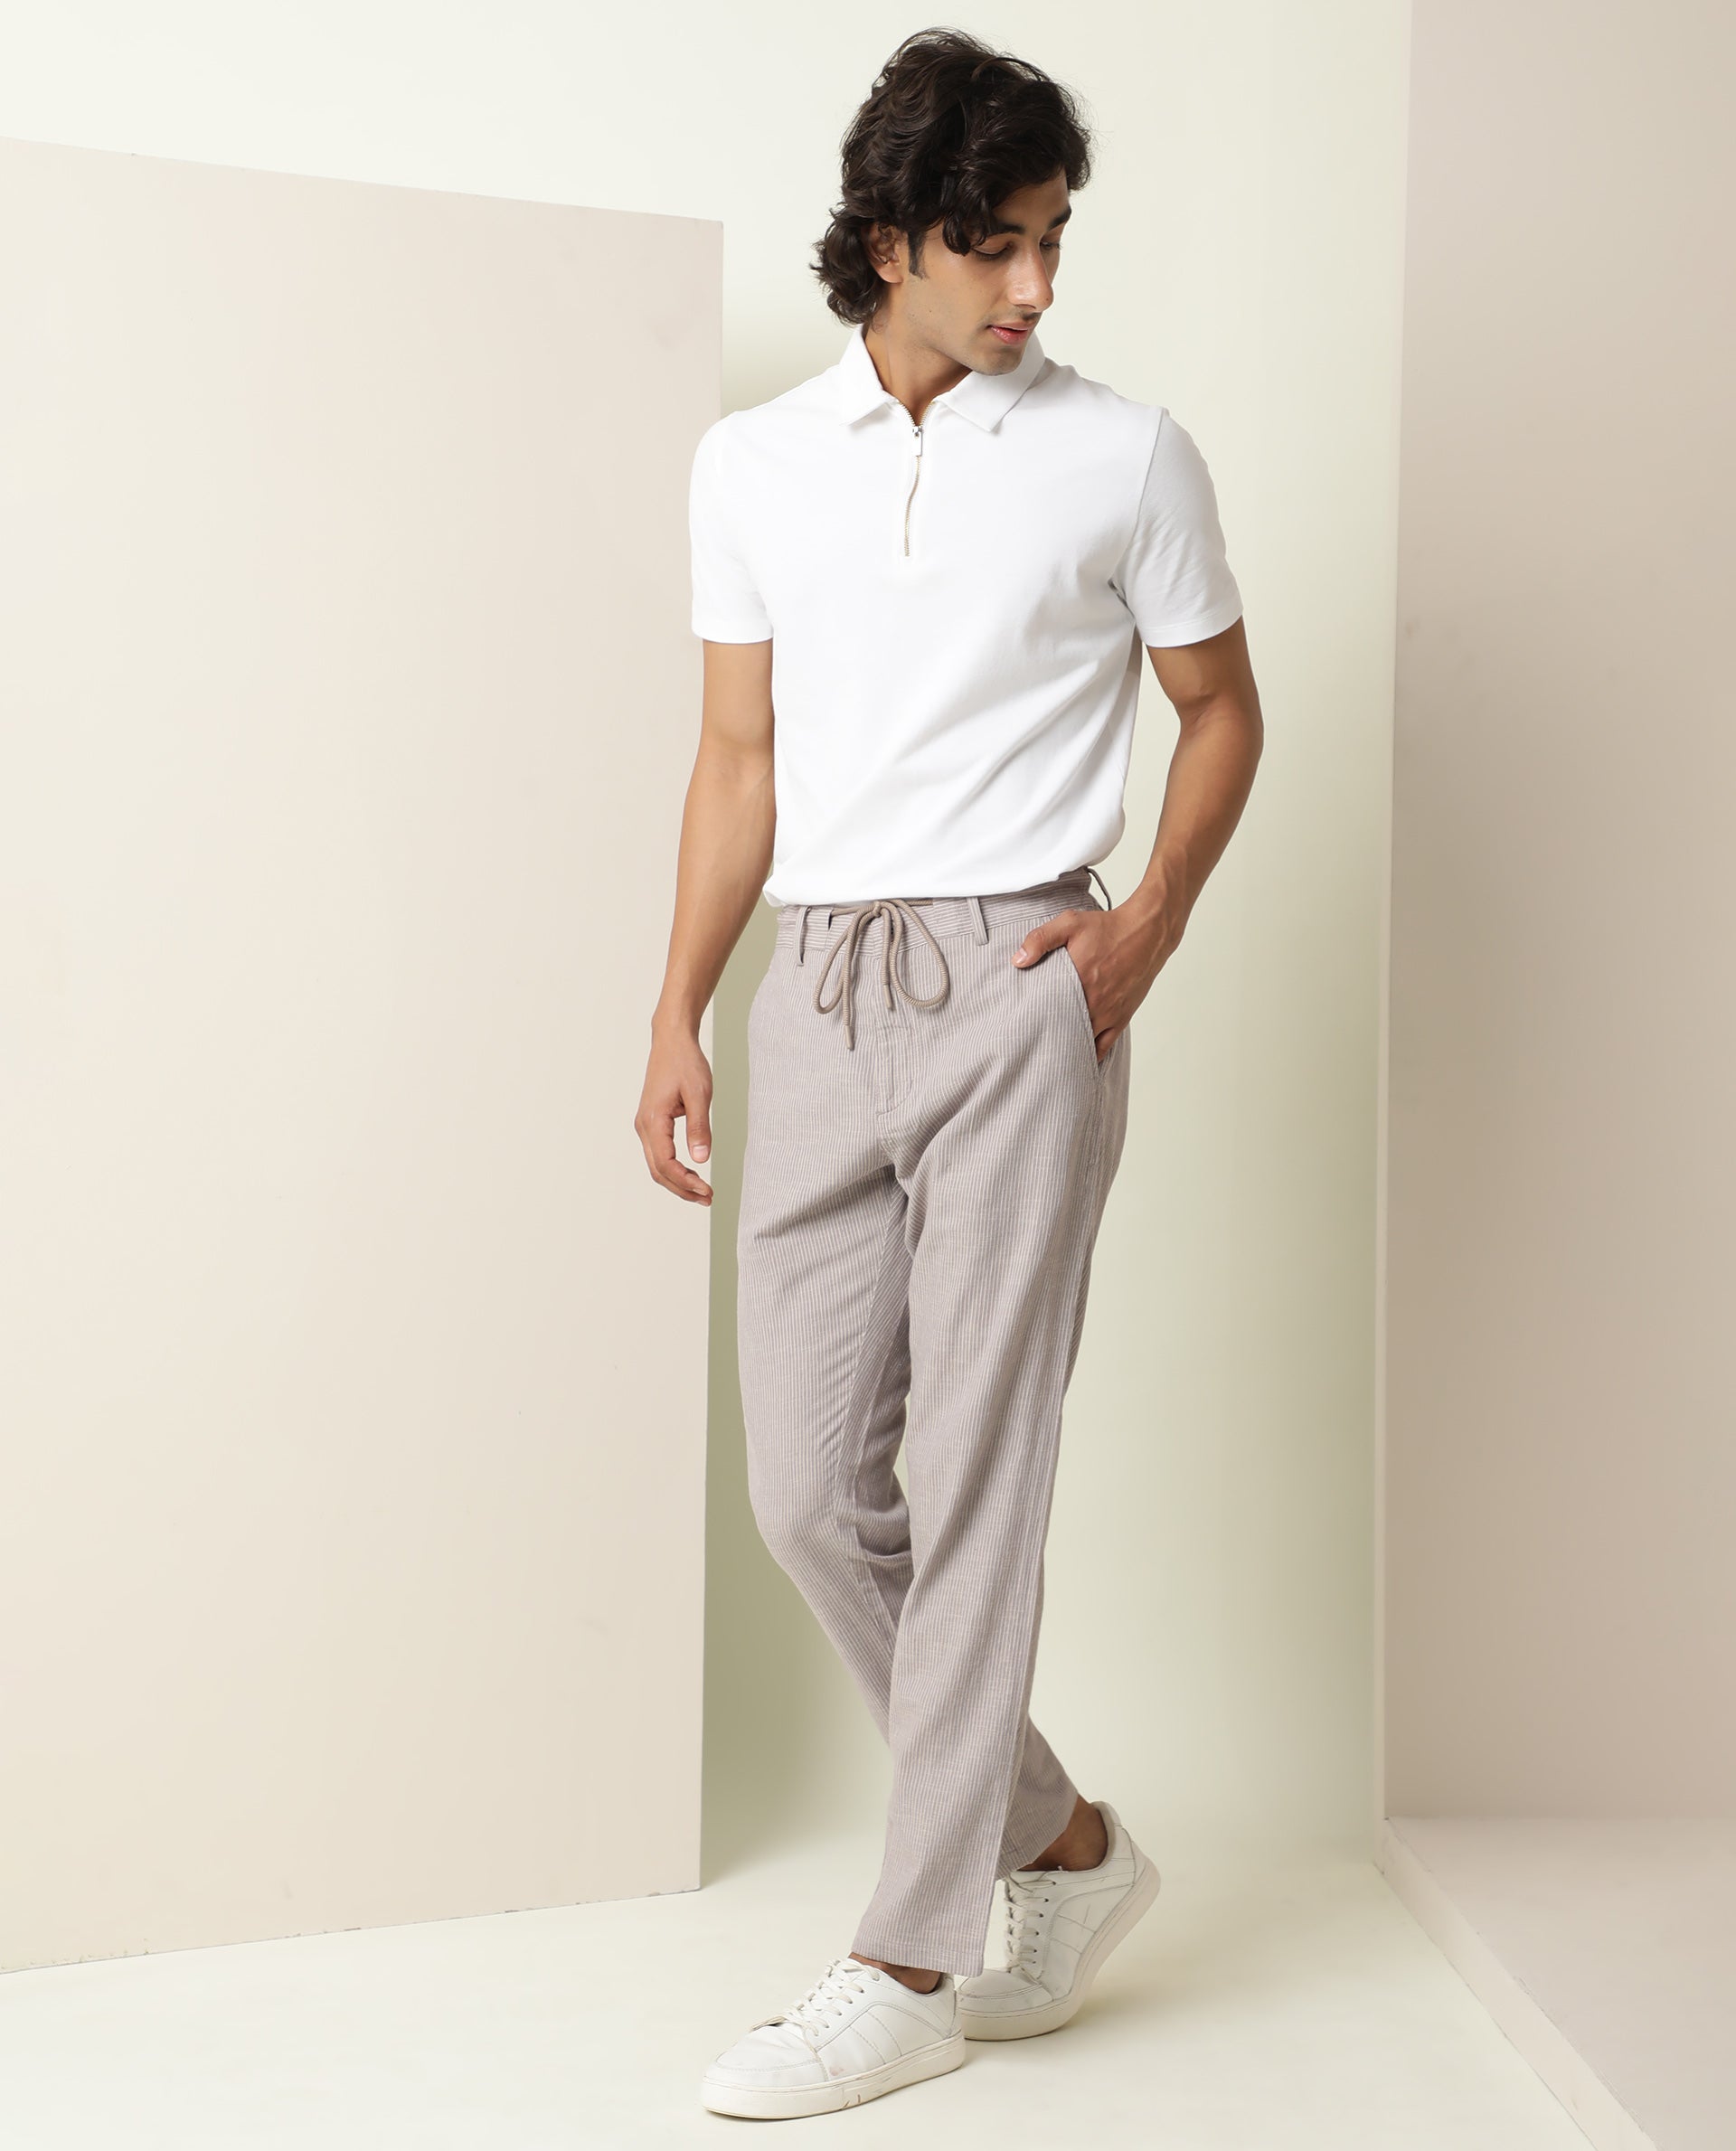 Grey Mid Rise Striped Pants